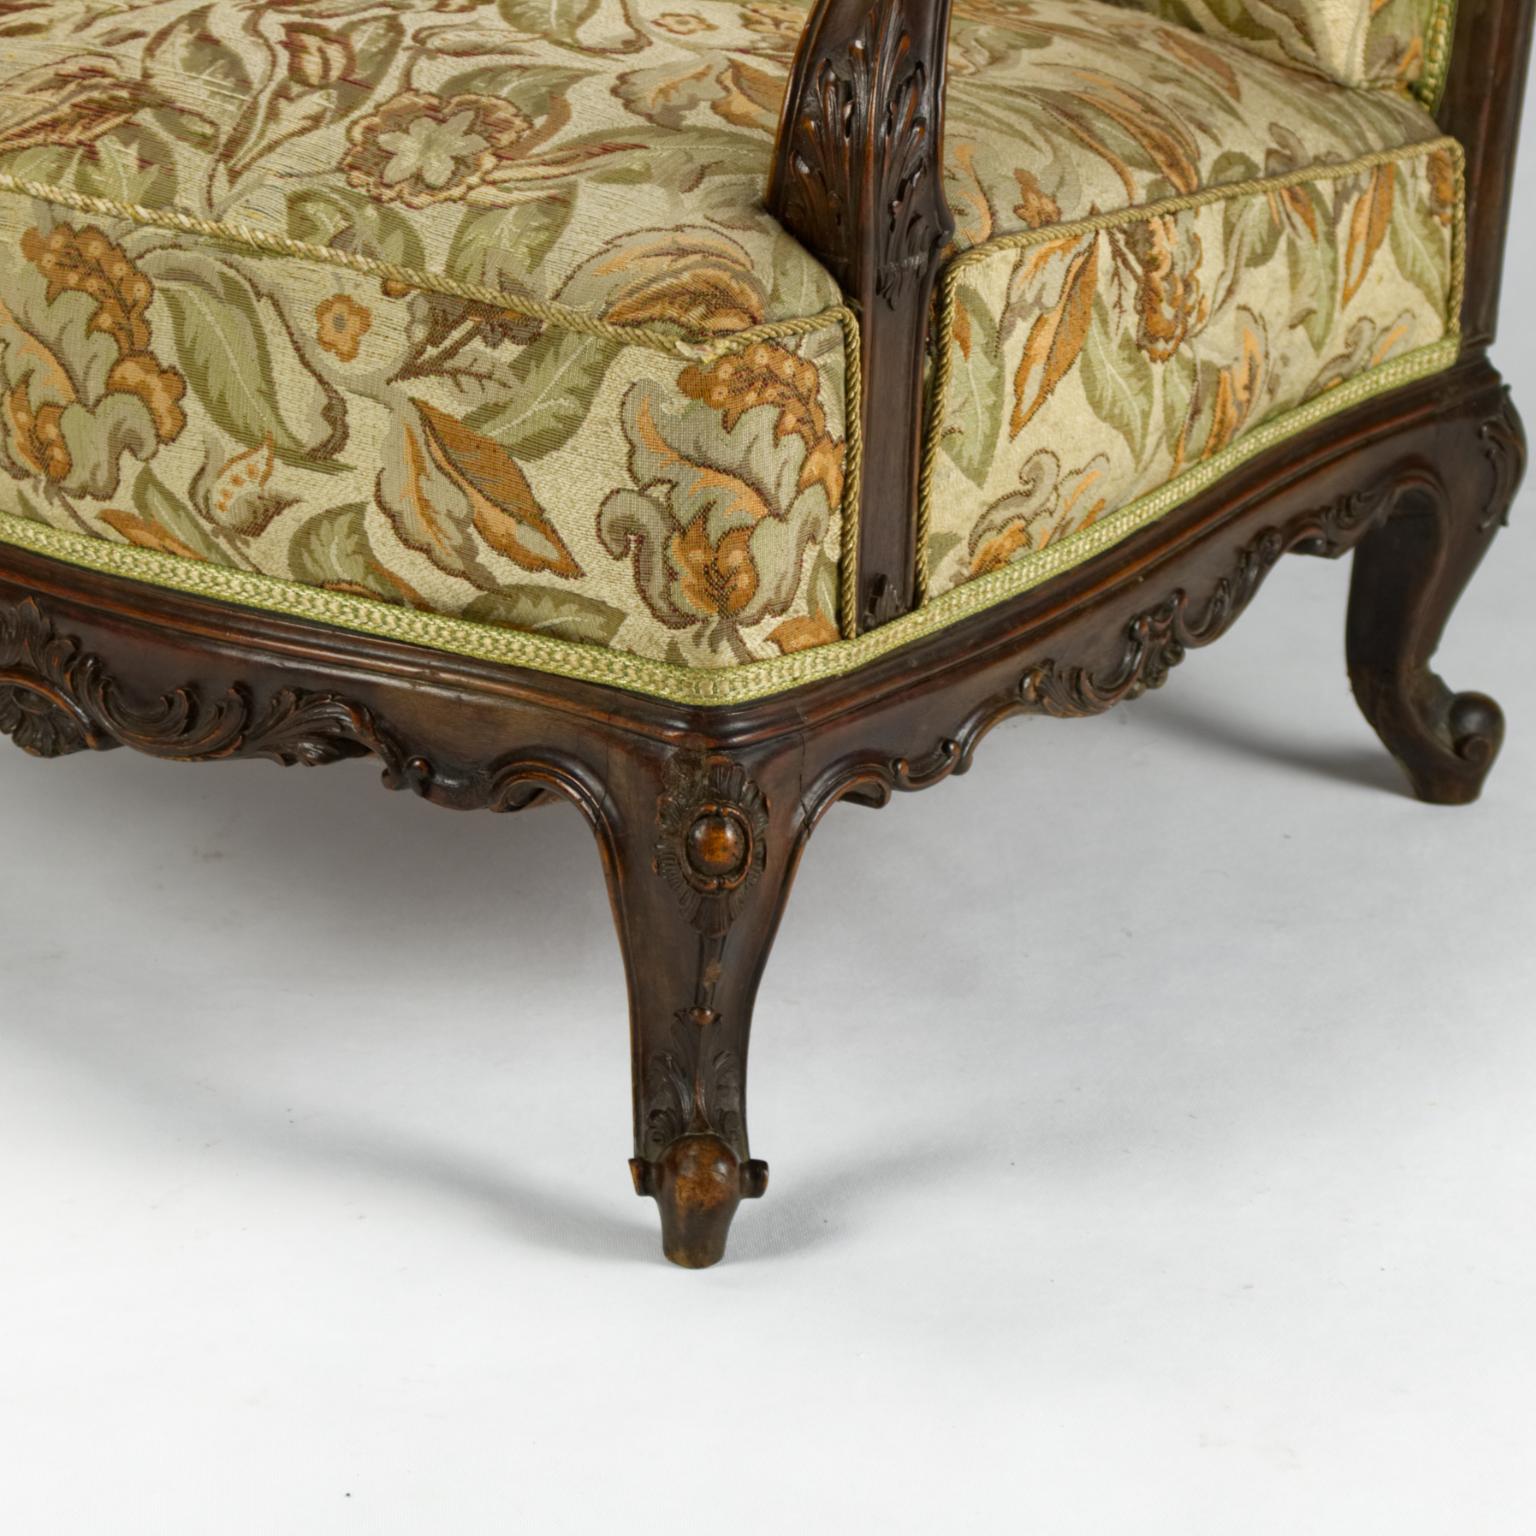 19th century Austro-Hungarian Louis XV style hand carved walnut bergère armchair in original condition, original upholstery, and wing back.